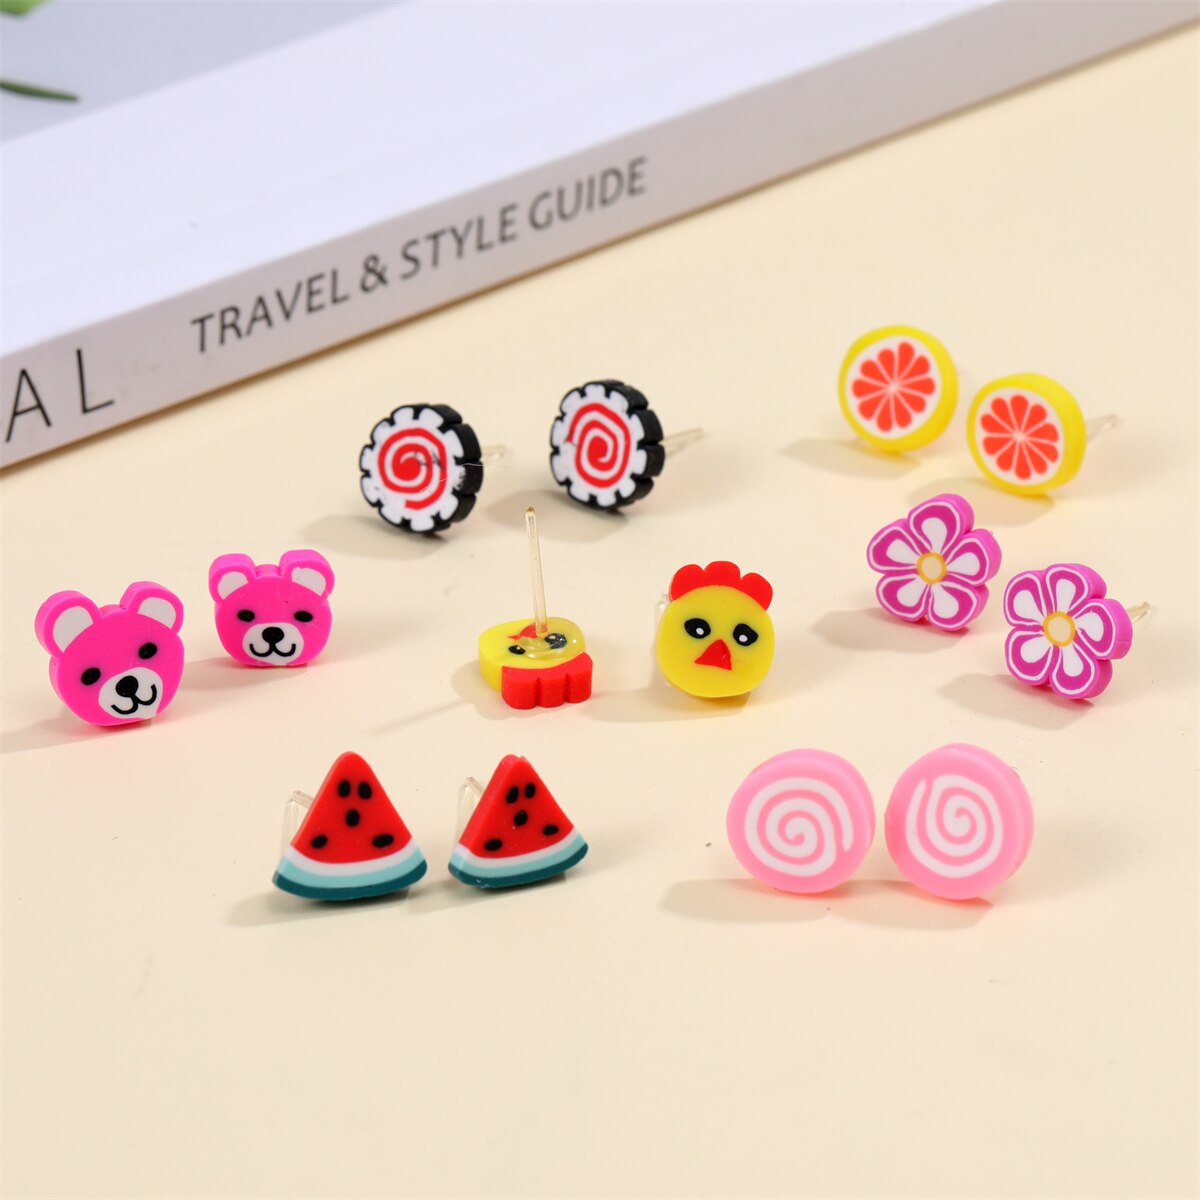 Wholesale 100Pairs/Set Mix Style Small Stud Earrings Set for Girls Women Cute Heart Child Earring Fashion Jewelry Gift